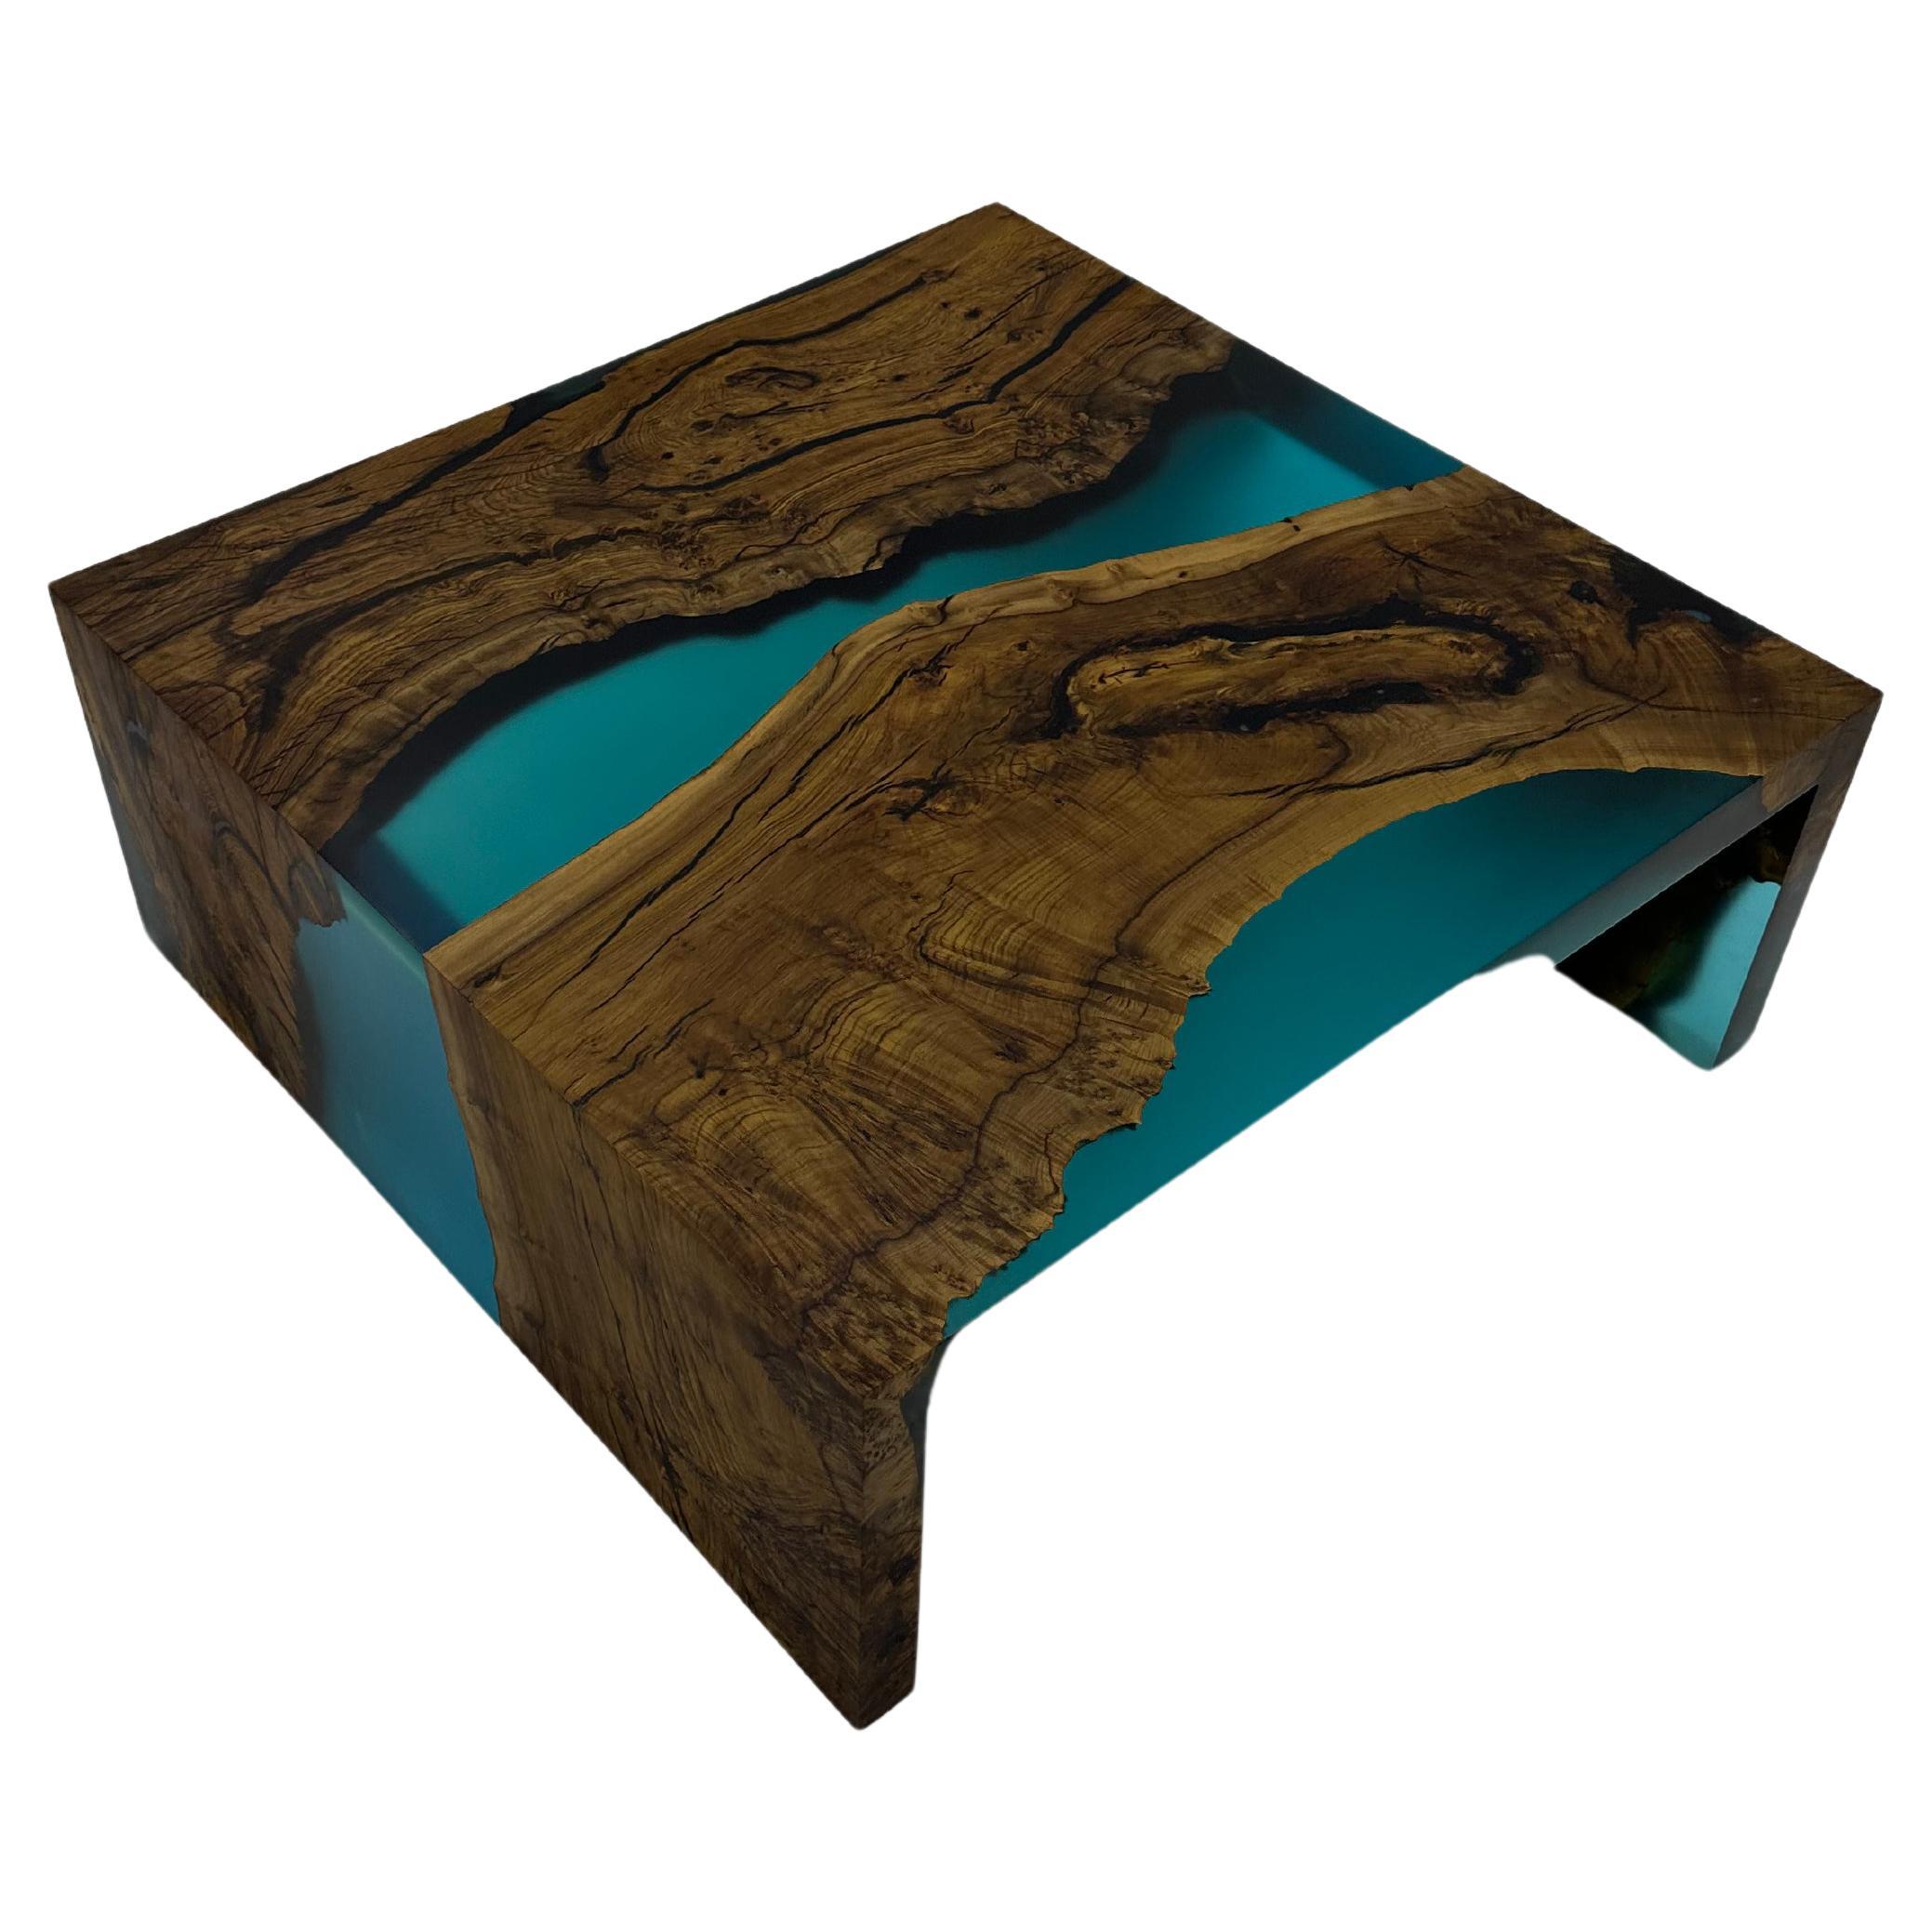 What type of resin is used for wood tables?